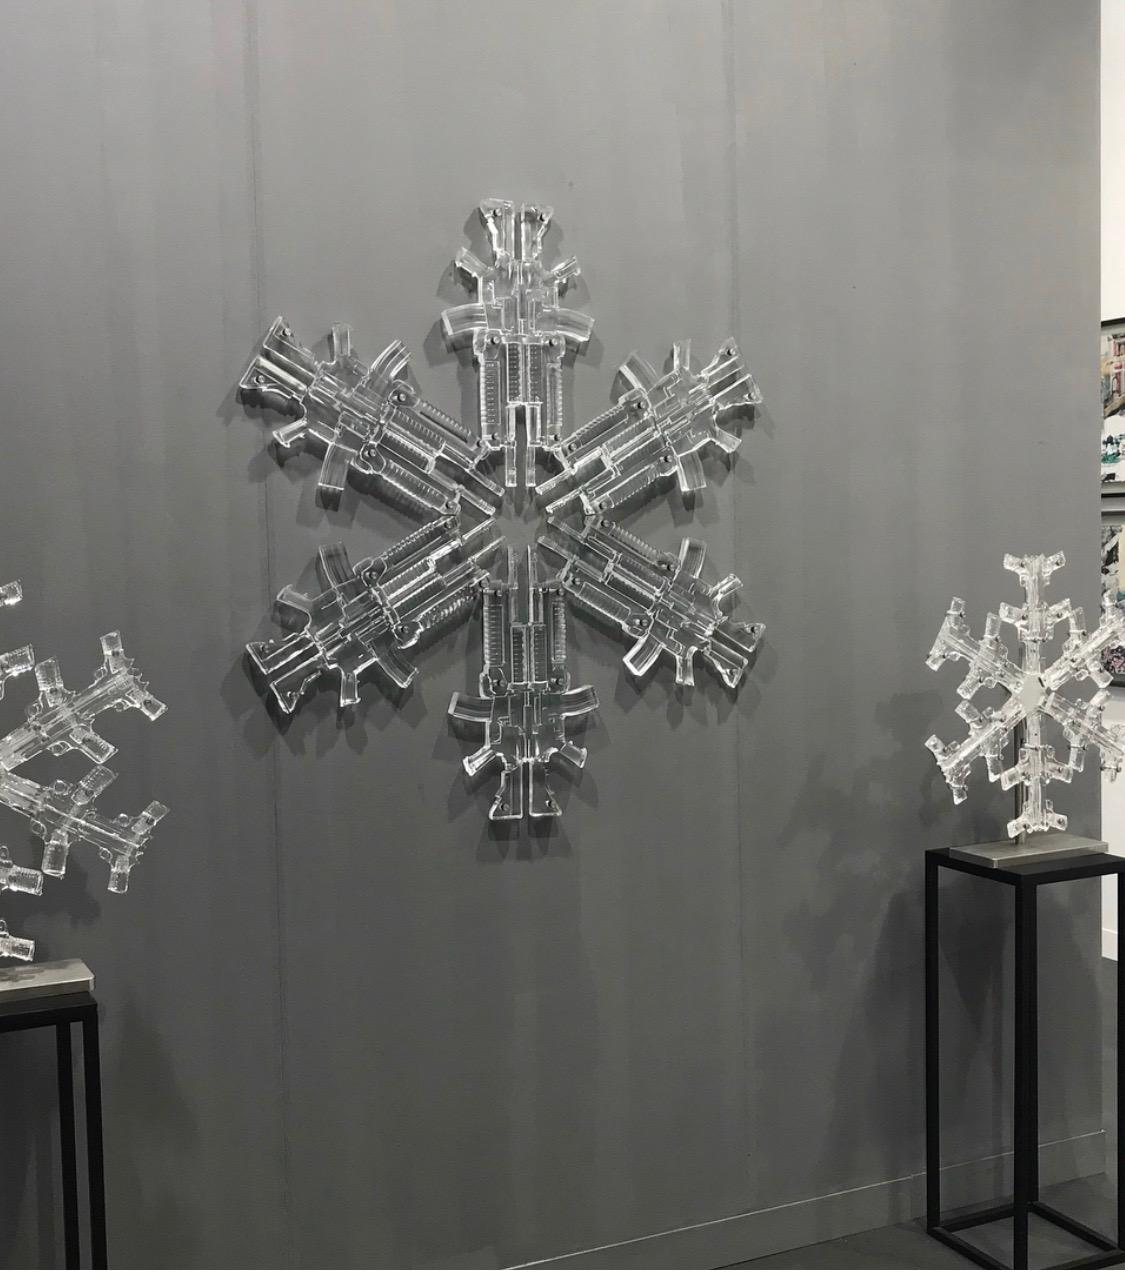 Snowflake 3 Limited edition of 8 Glass sculpture by Huang Yulong 3